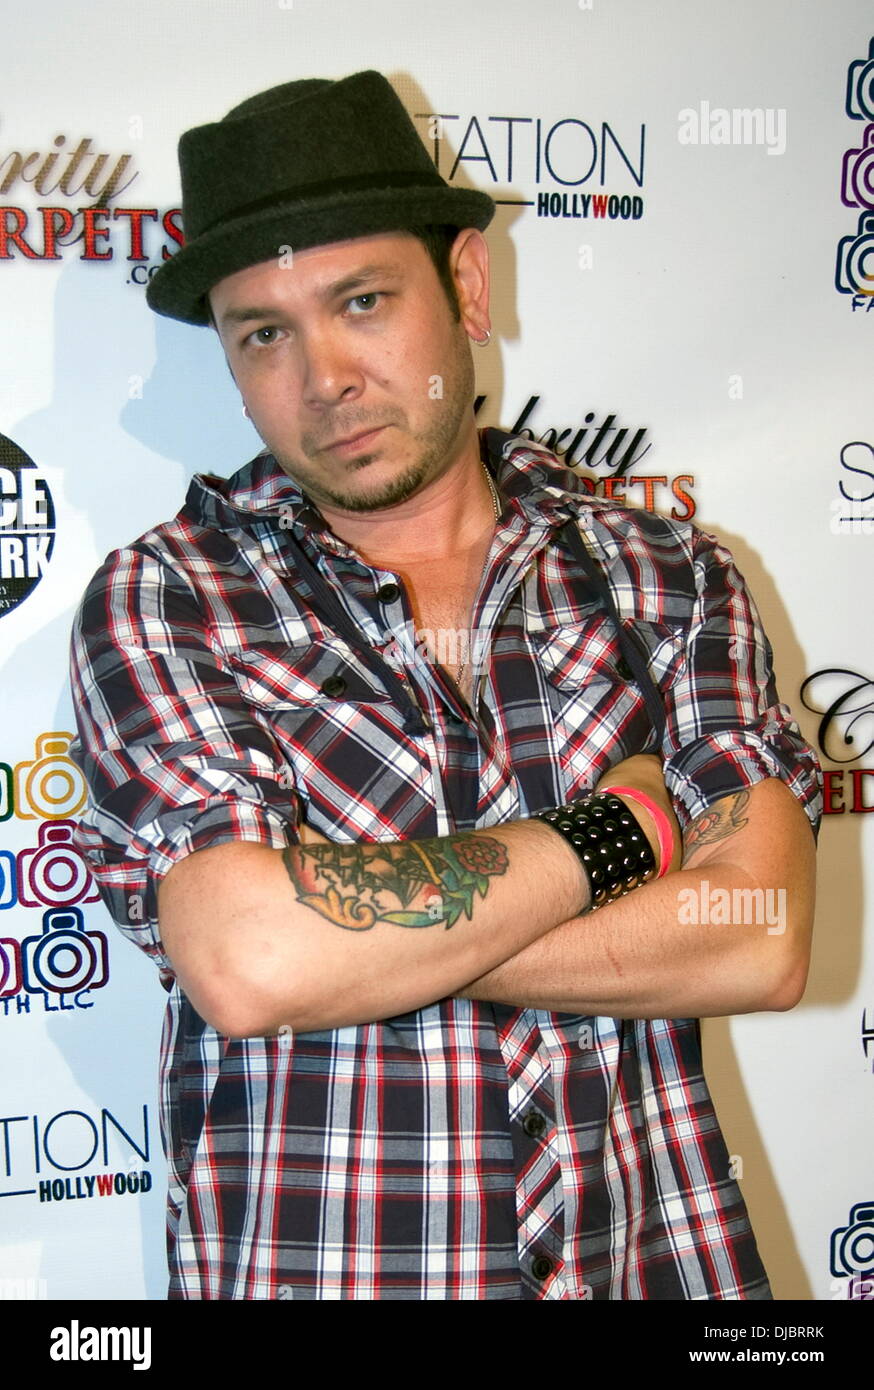 Brian Ronalds VMA awards Afterparty in Hollywood Station innen das W Hotel Los Angeles, Kalifornien - 06.09.12 Stockfoto